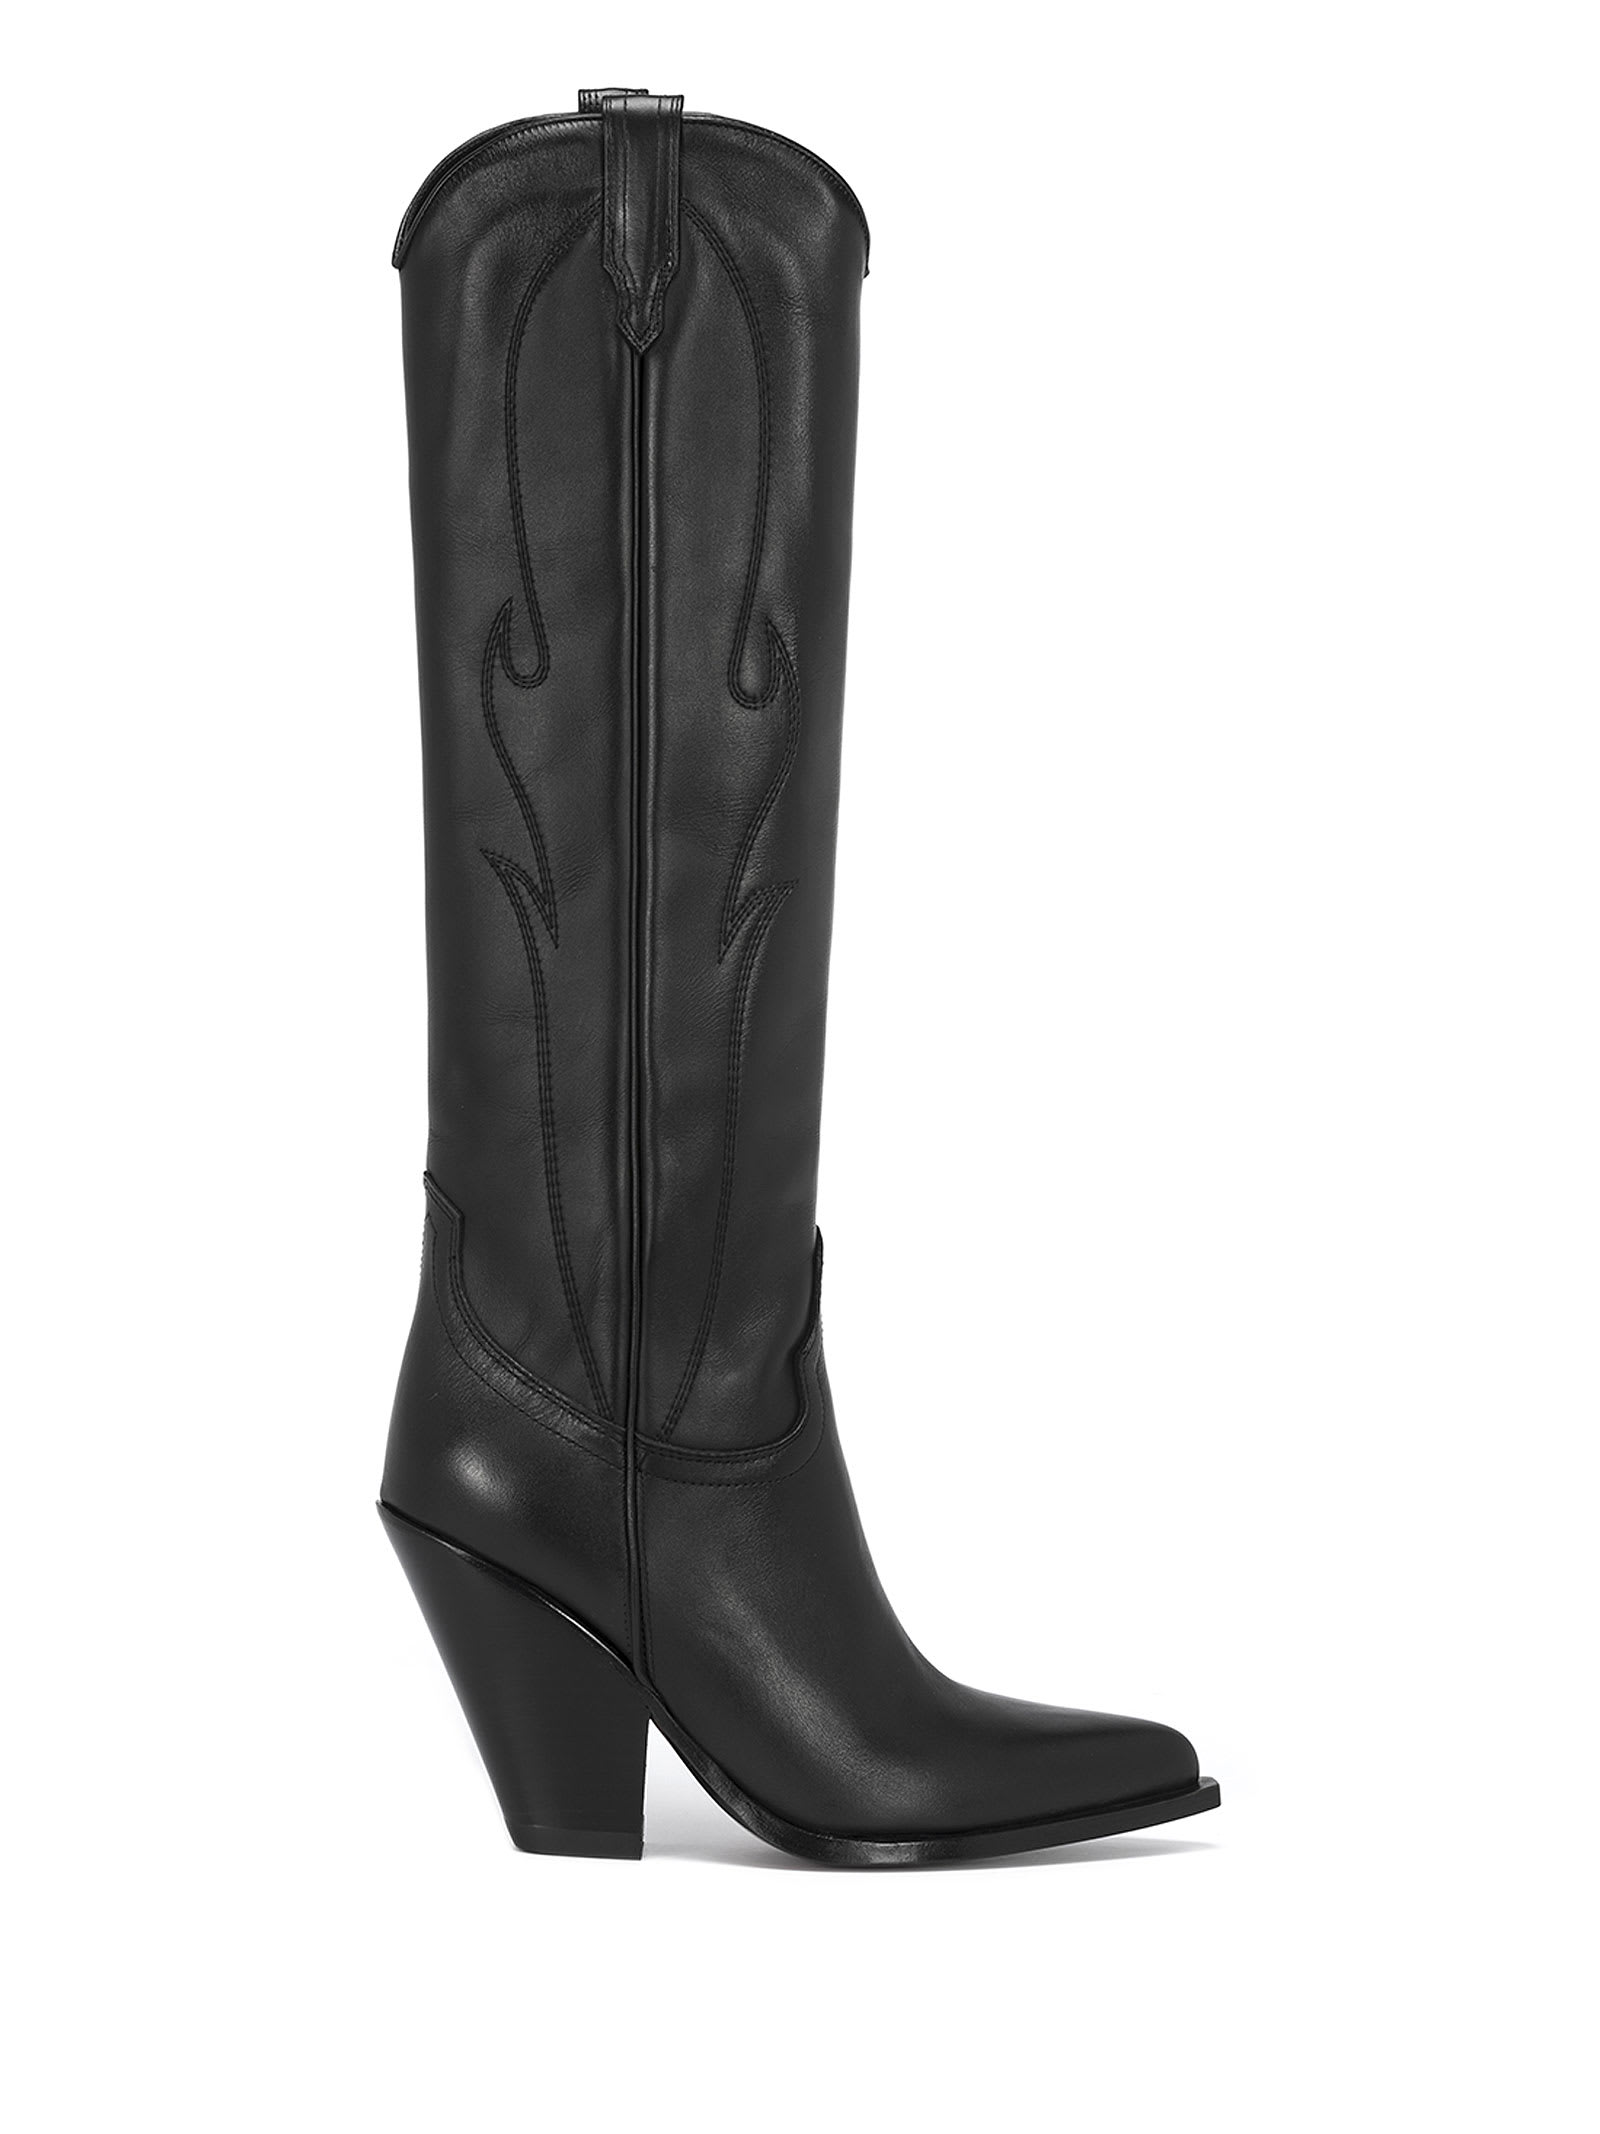 Sonora Texano Rancho Knee Length In Black Leather